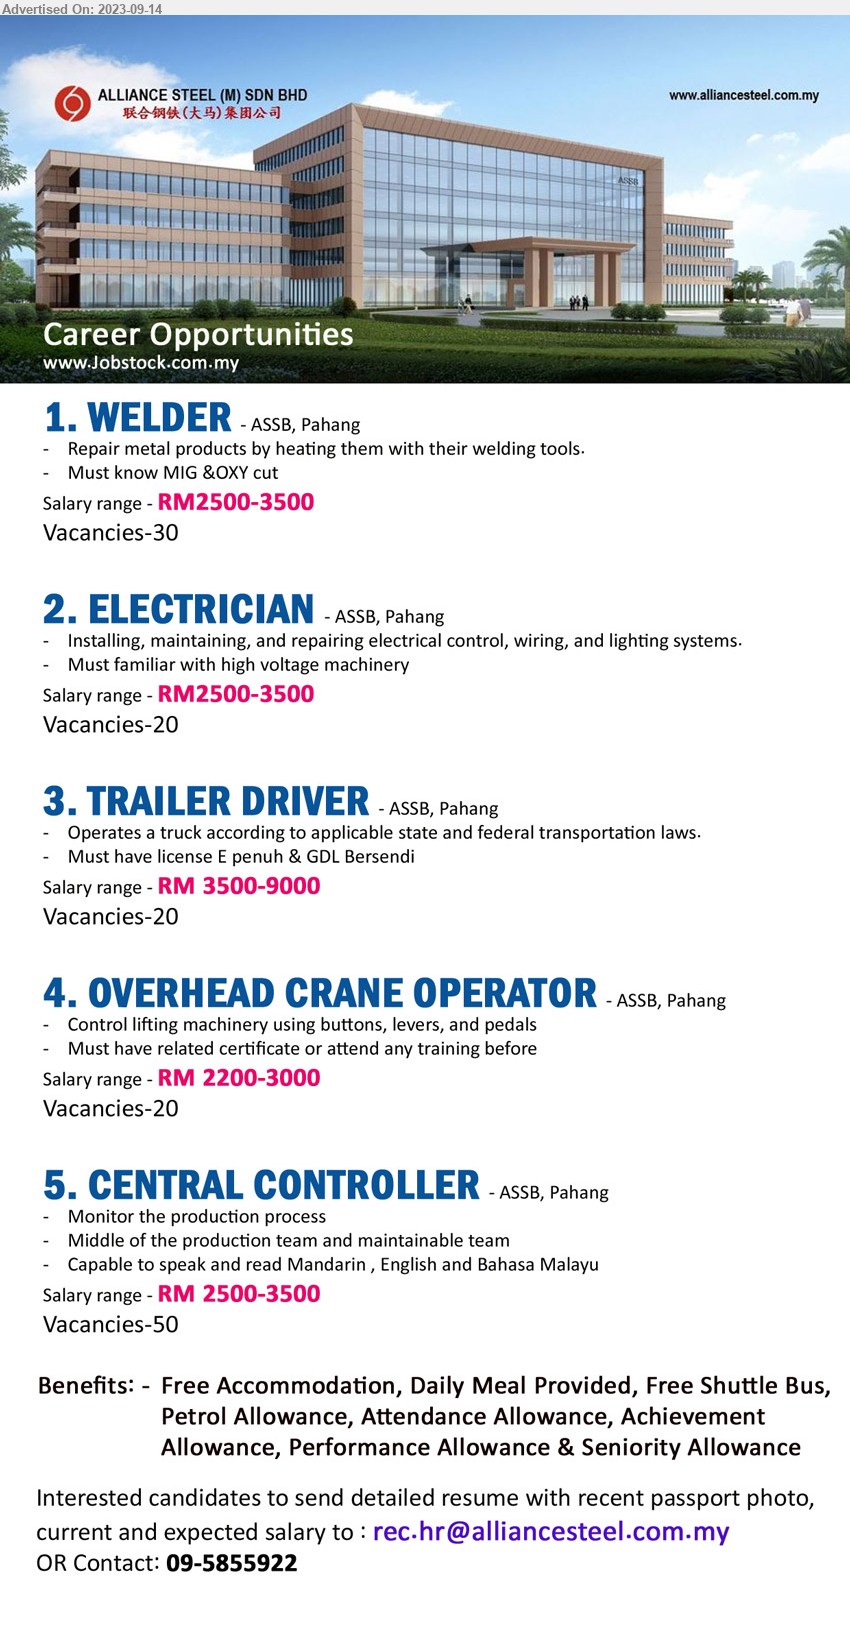 ALLIANCE STEEL (M) SDN BHD - 1. WELDER (ASSB, Pahang), 30 posts, RM2500-3500, Must know MIG &OXY cut,...
2. ELECTRICIAN (ASSB, Pahang), 20 posts, RM2500-3500, Must familiar with high voltage machinery,...
3. TRAILER DRIVER (ASSB, Pahang), 20 posts, RM 3500-9000, Operates a truck according to applicable state and federal transportation laws.,...
4. OVERHEAD CRANE OPERATOR (ASSB, Pahang), 20 posts, RM 2200-3000, Control lifting machinery using buttons, levers, and pedals,...
5. CENTRAL CONTROLLER  (ASSB, Pahang), 50 posts, RM 2500-3500, Monitor the production process,...
Contact: 09-5855922 / Email resume to ...